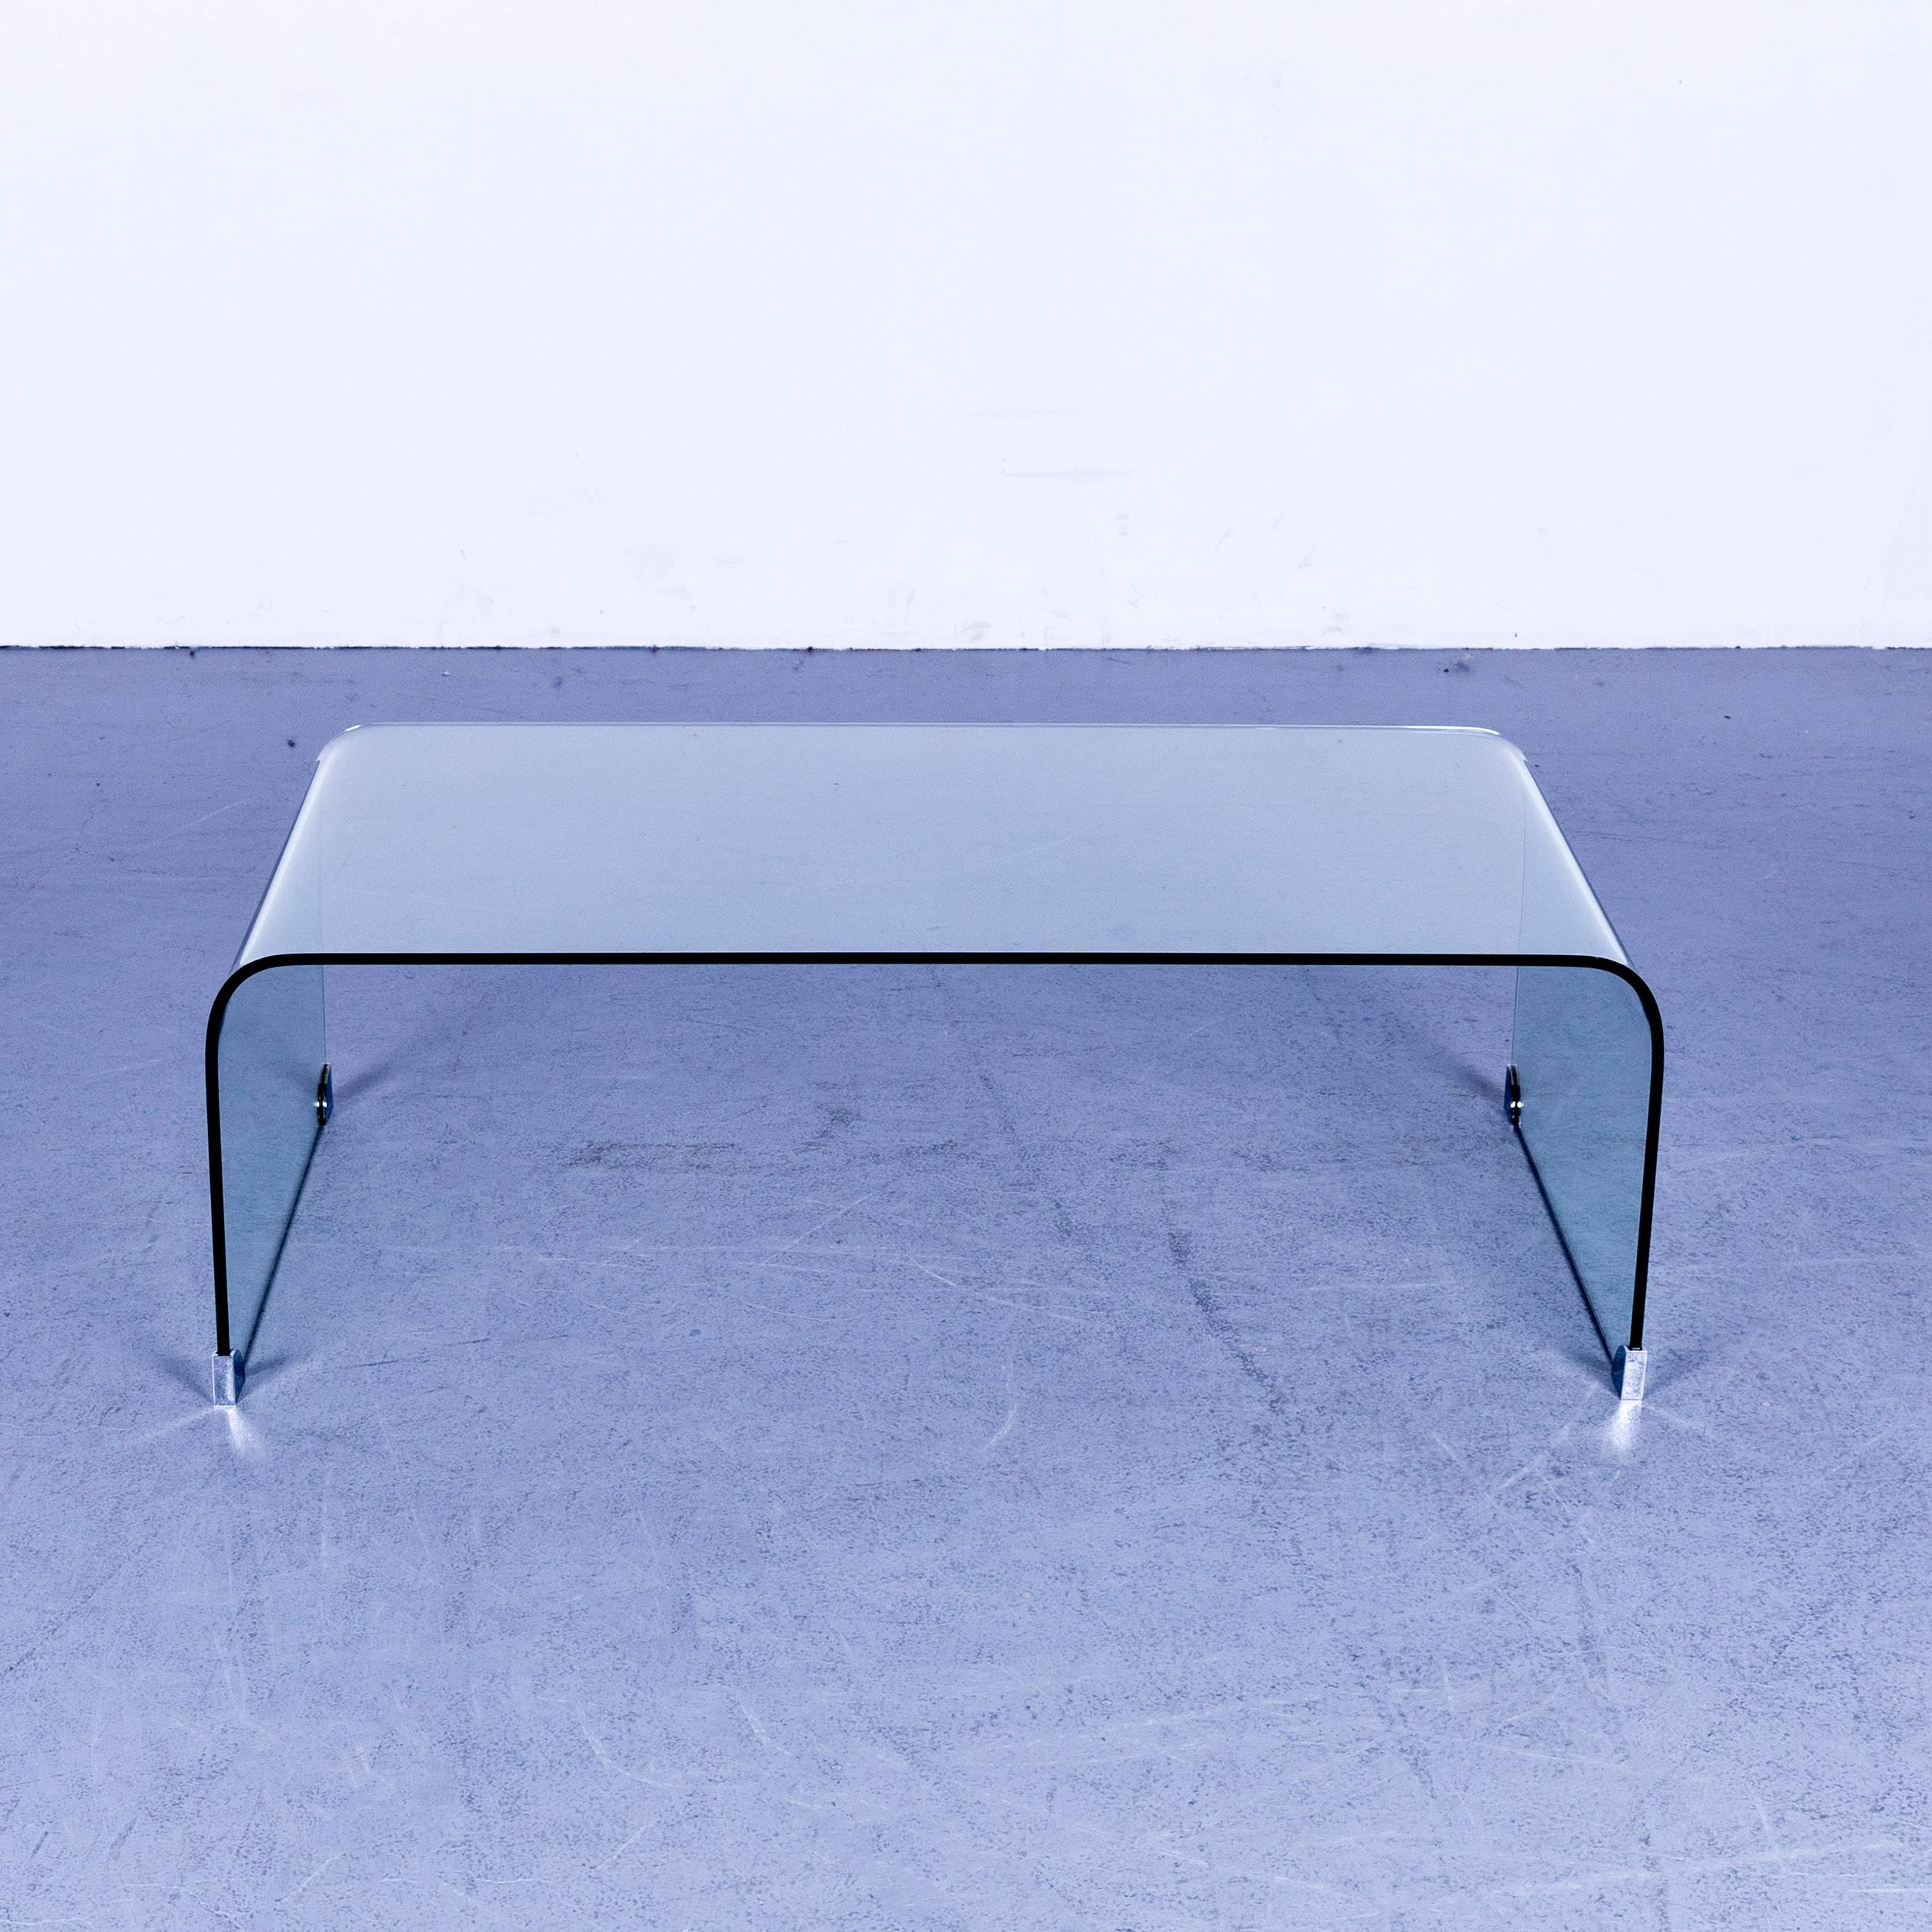 Designer coffee table glass with metal feet rounded corners.